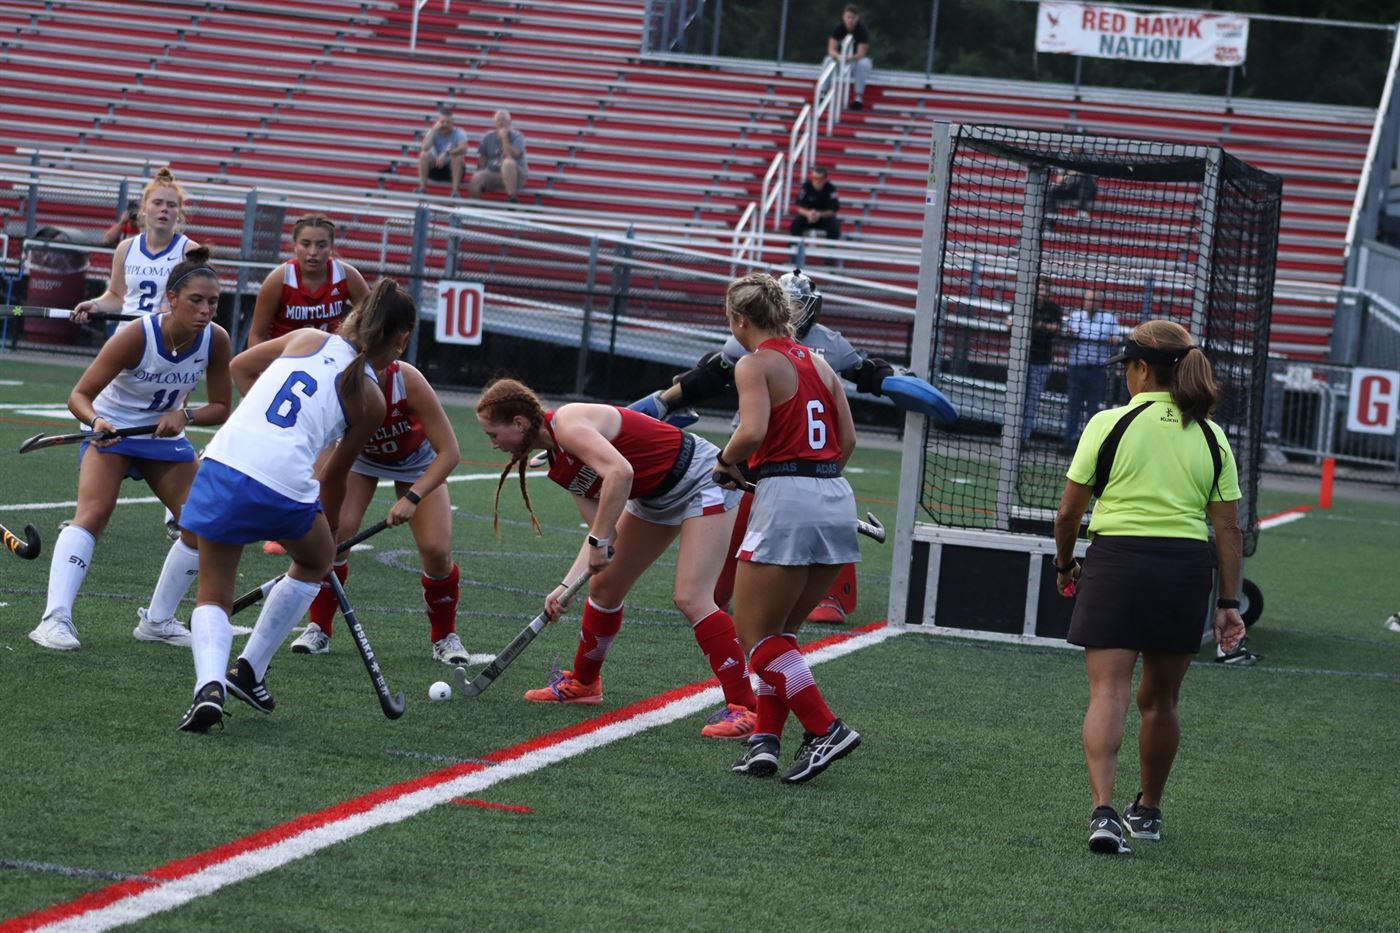 The Diplomats of Franklin and Marshall had 11 shots on goal, while Montclair State only had one of those attempts. Trevor Geisberg | The Montclarion